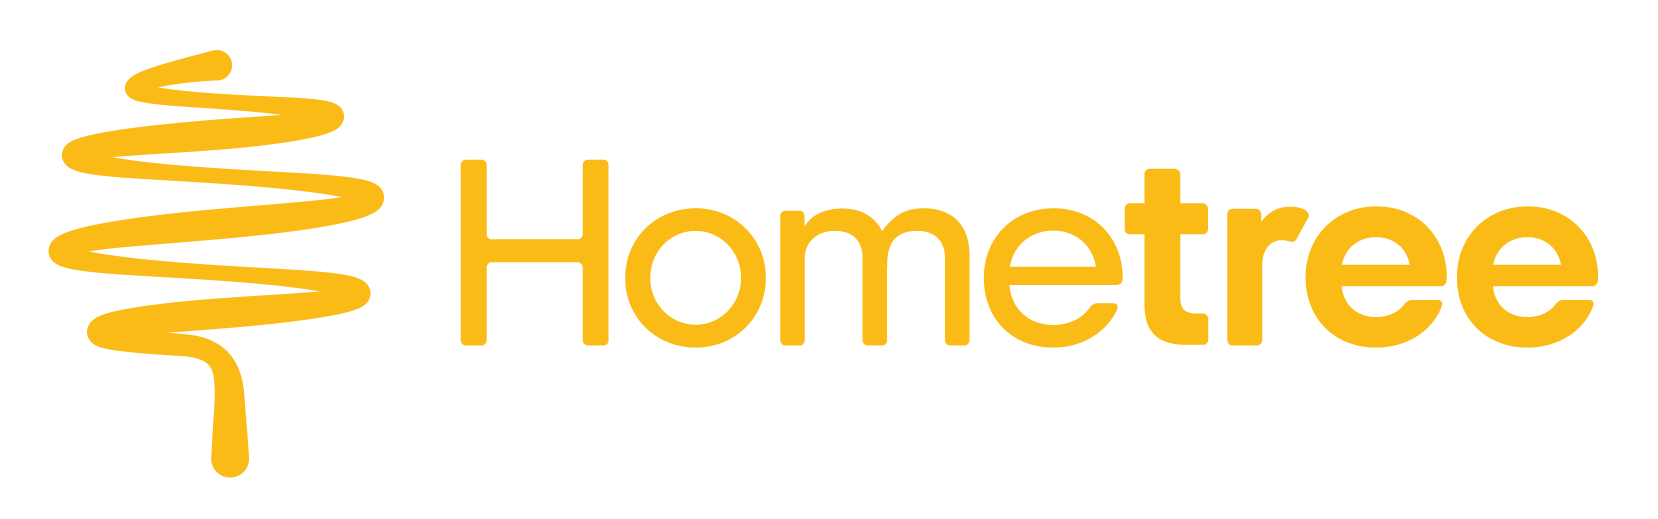 Home Tree Logo - New Boiler Installation & Replacement | Hometree